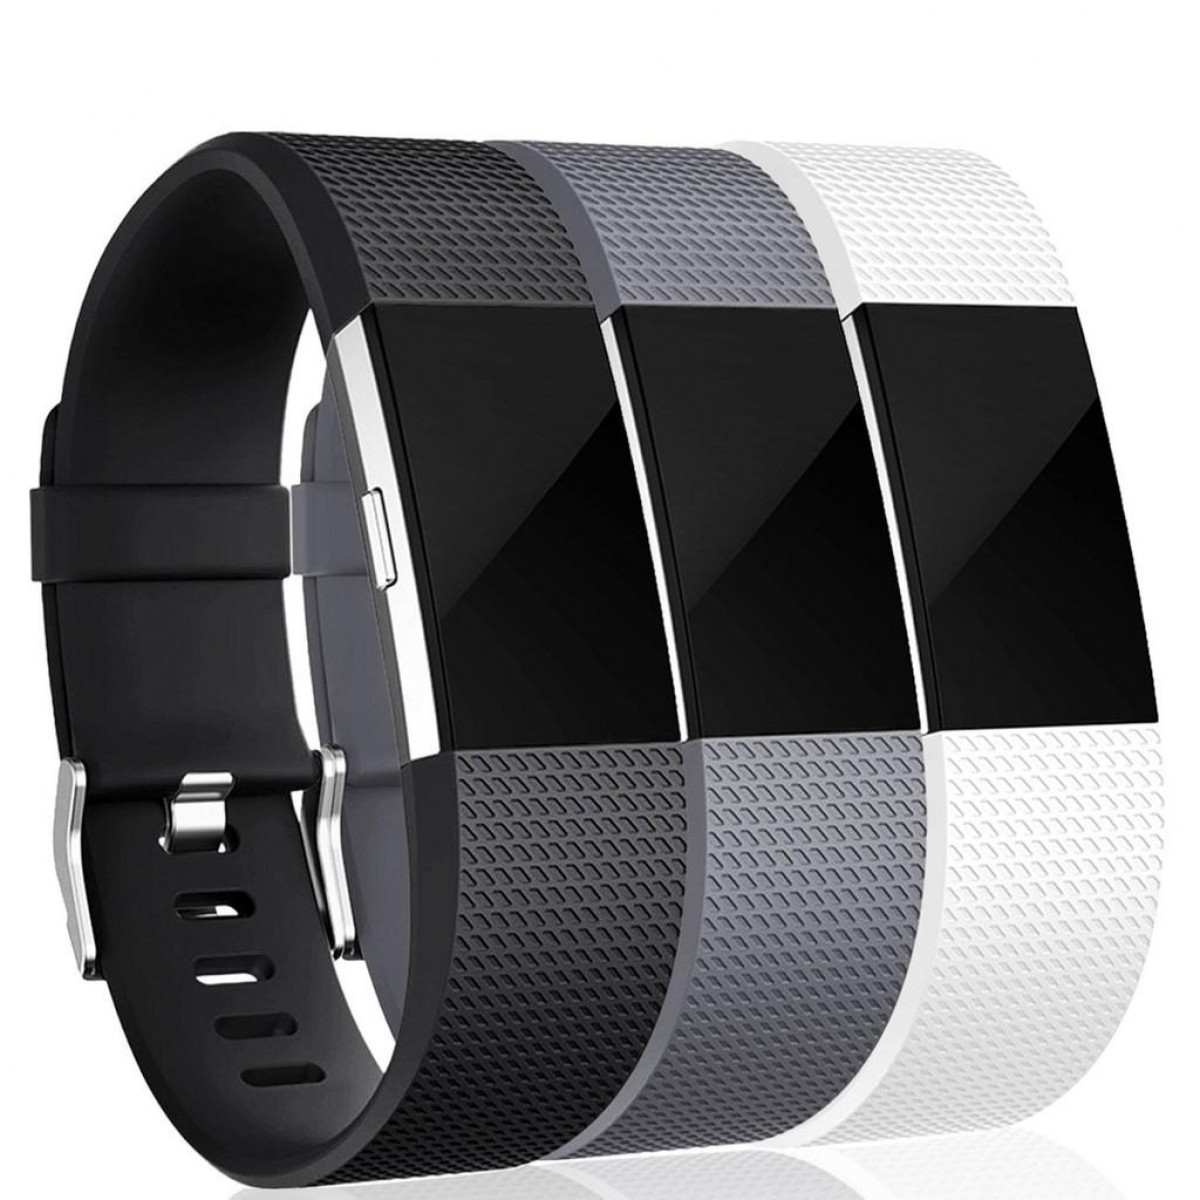 INF Fitbit Charge 2 schwarz/grau/weiß Charge 2 (S), (S), schwarz/grau/weiß 3er-Pack Armband Fitbit, Armband